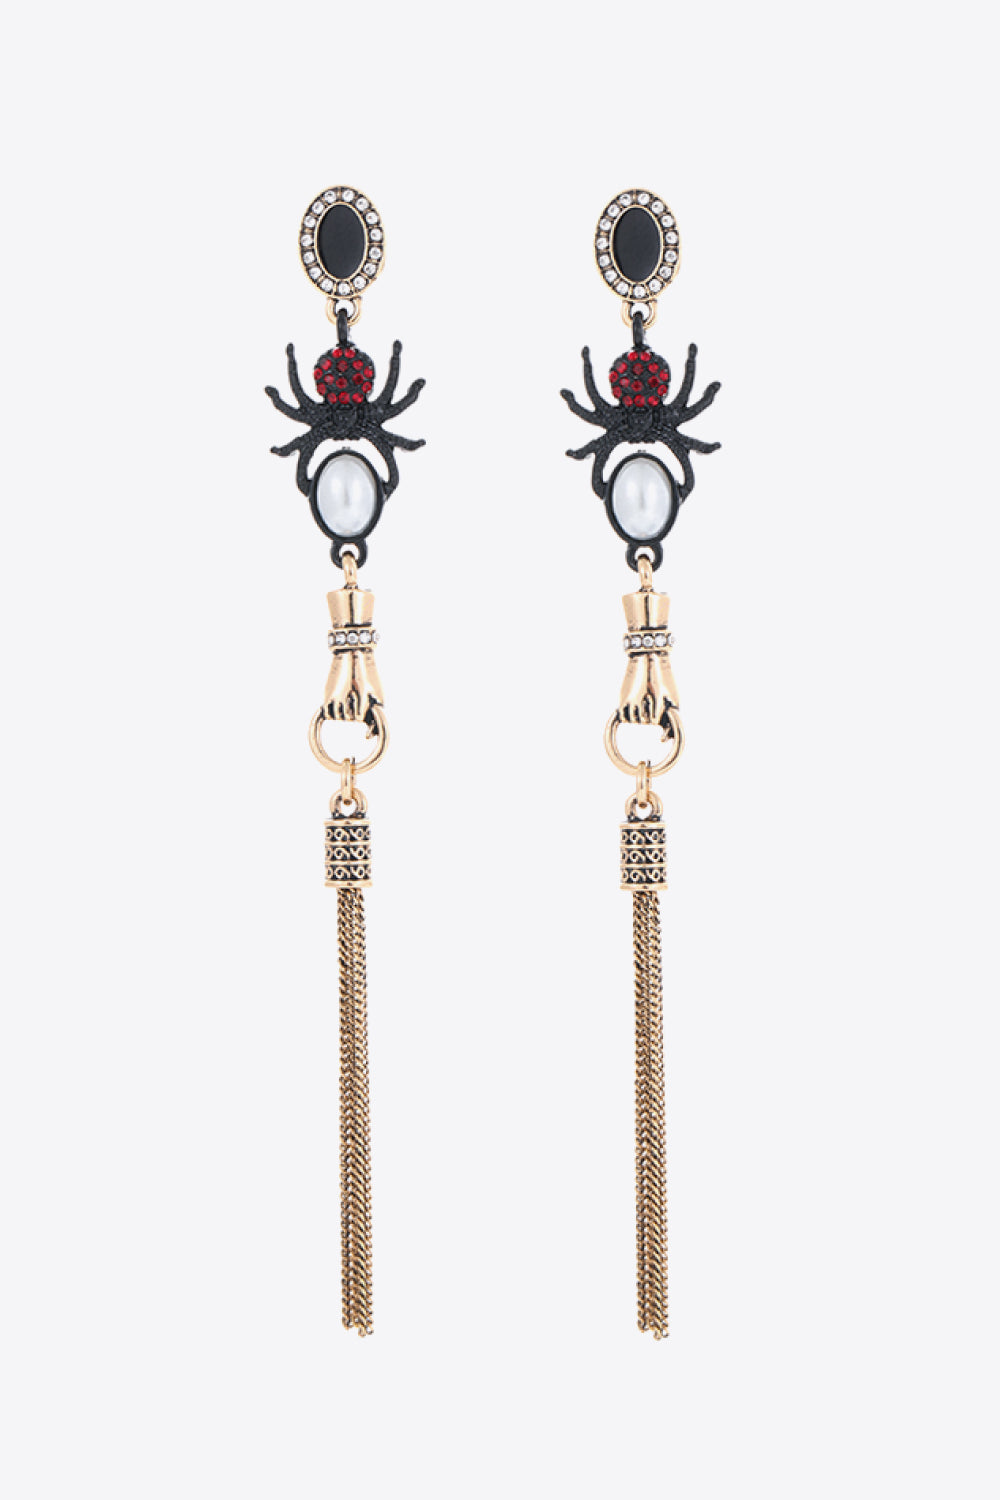 18K Gold-Plated Spider Drop Earrings - Alonna's Legging Land